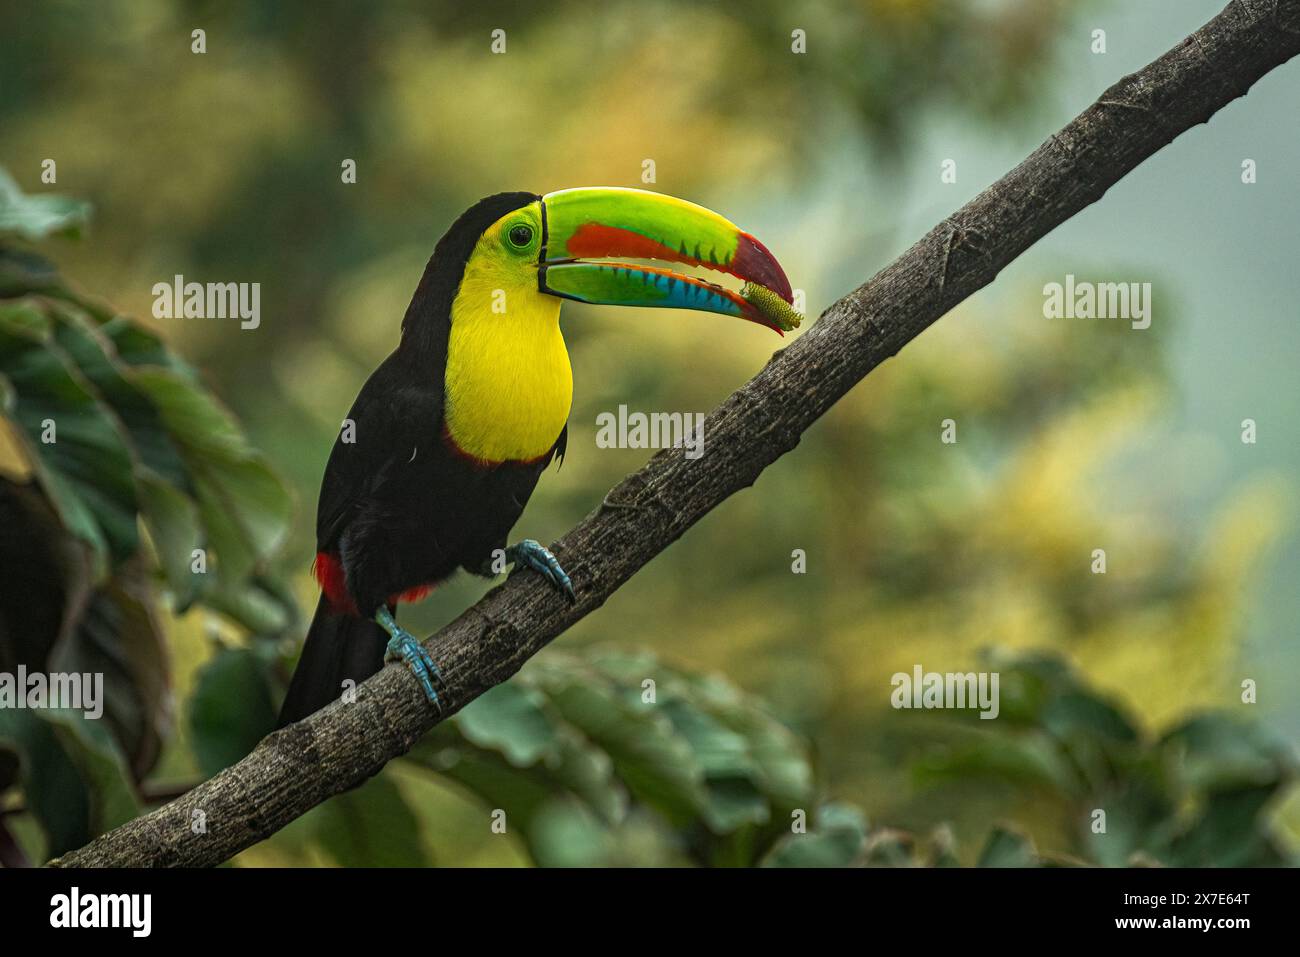 Keel billed toucan perched close up Stock Photo